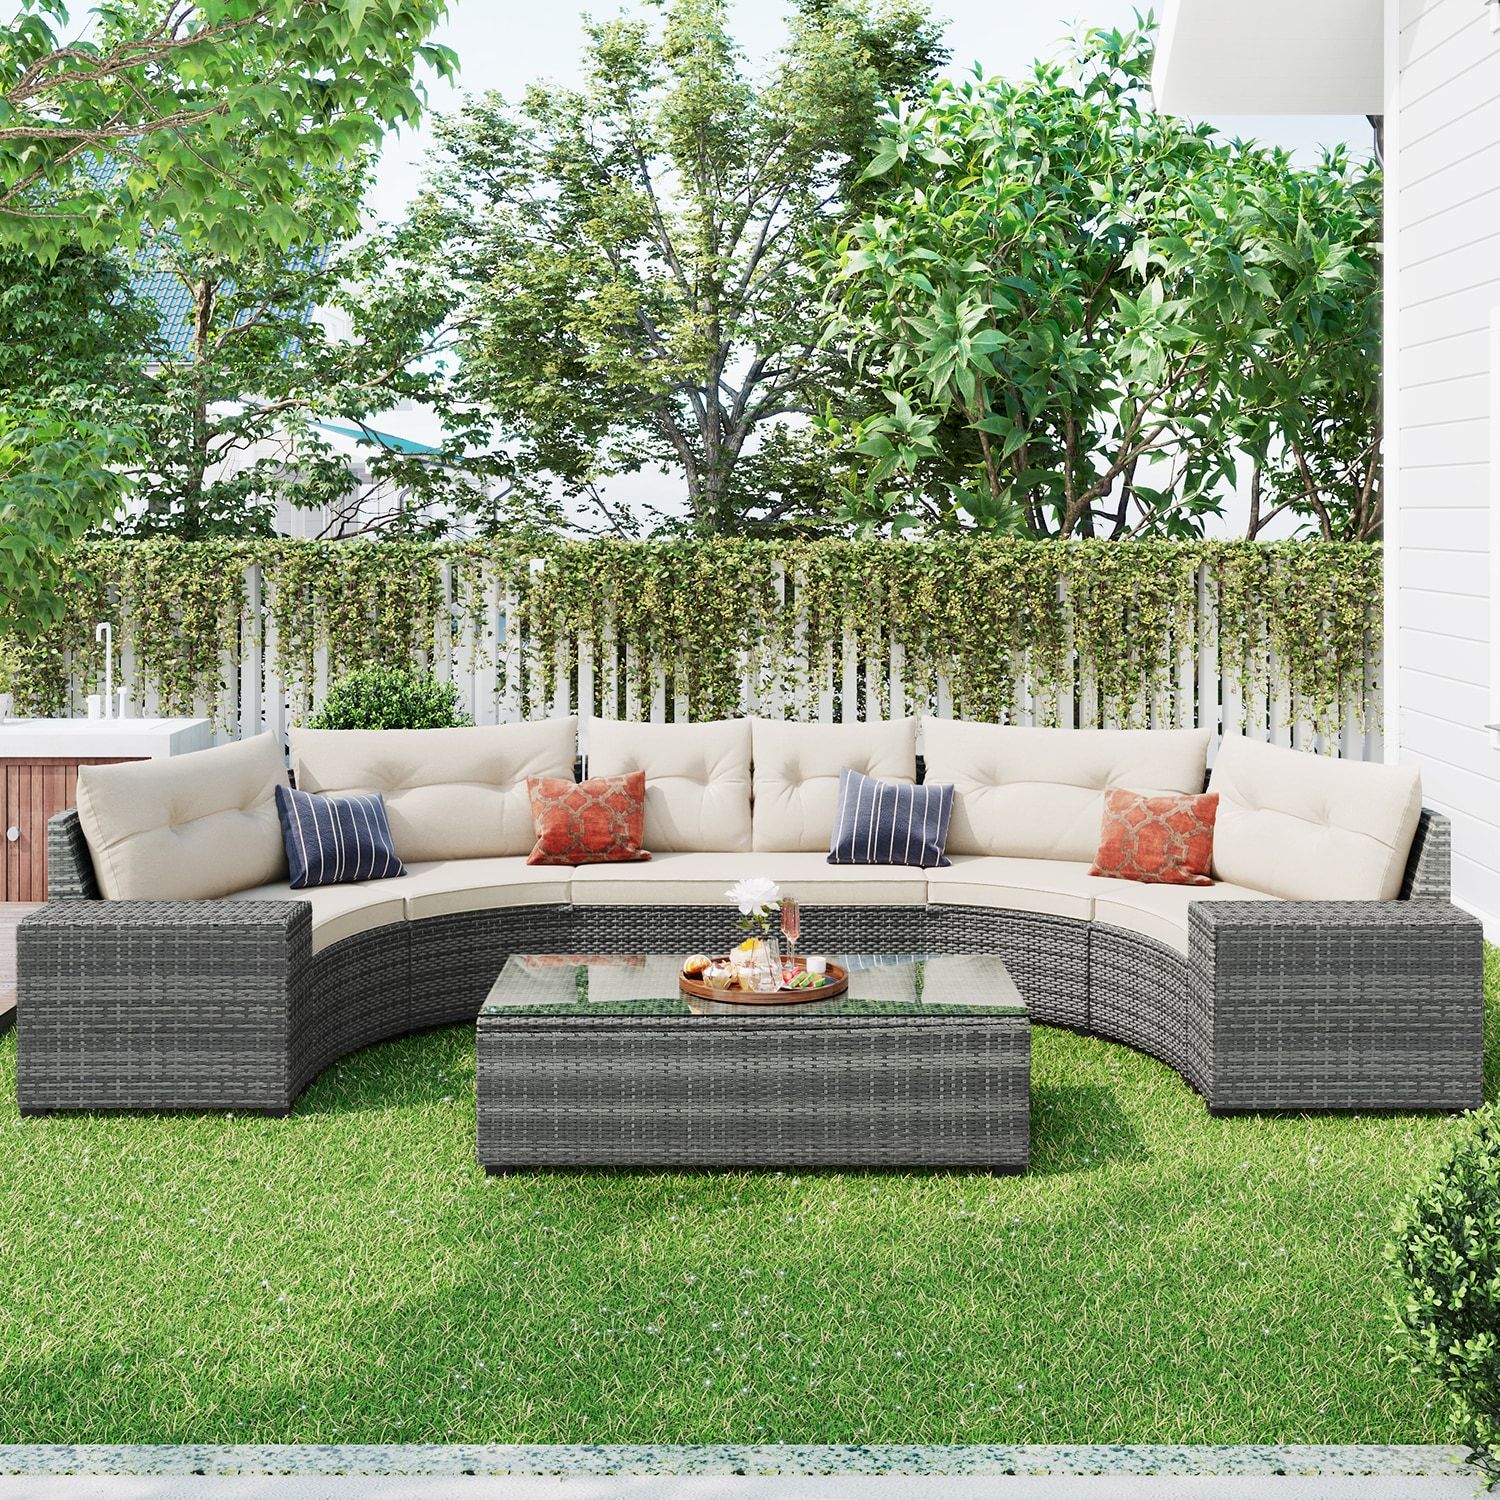 Gzmr Patio Furniture Set 8 Piece Rattan Patio Conversation Set With  Off White Cushions In The Patio Conversation Sets Department At Lowes Throughout 8 Piece Patio Rattan Outdoor Furniture Set (View 4 of 15)